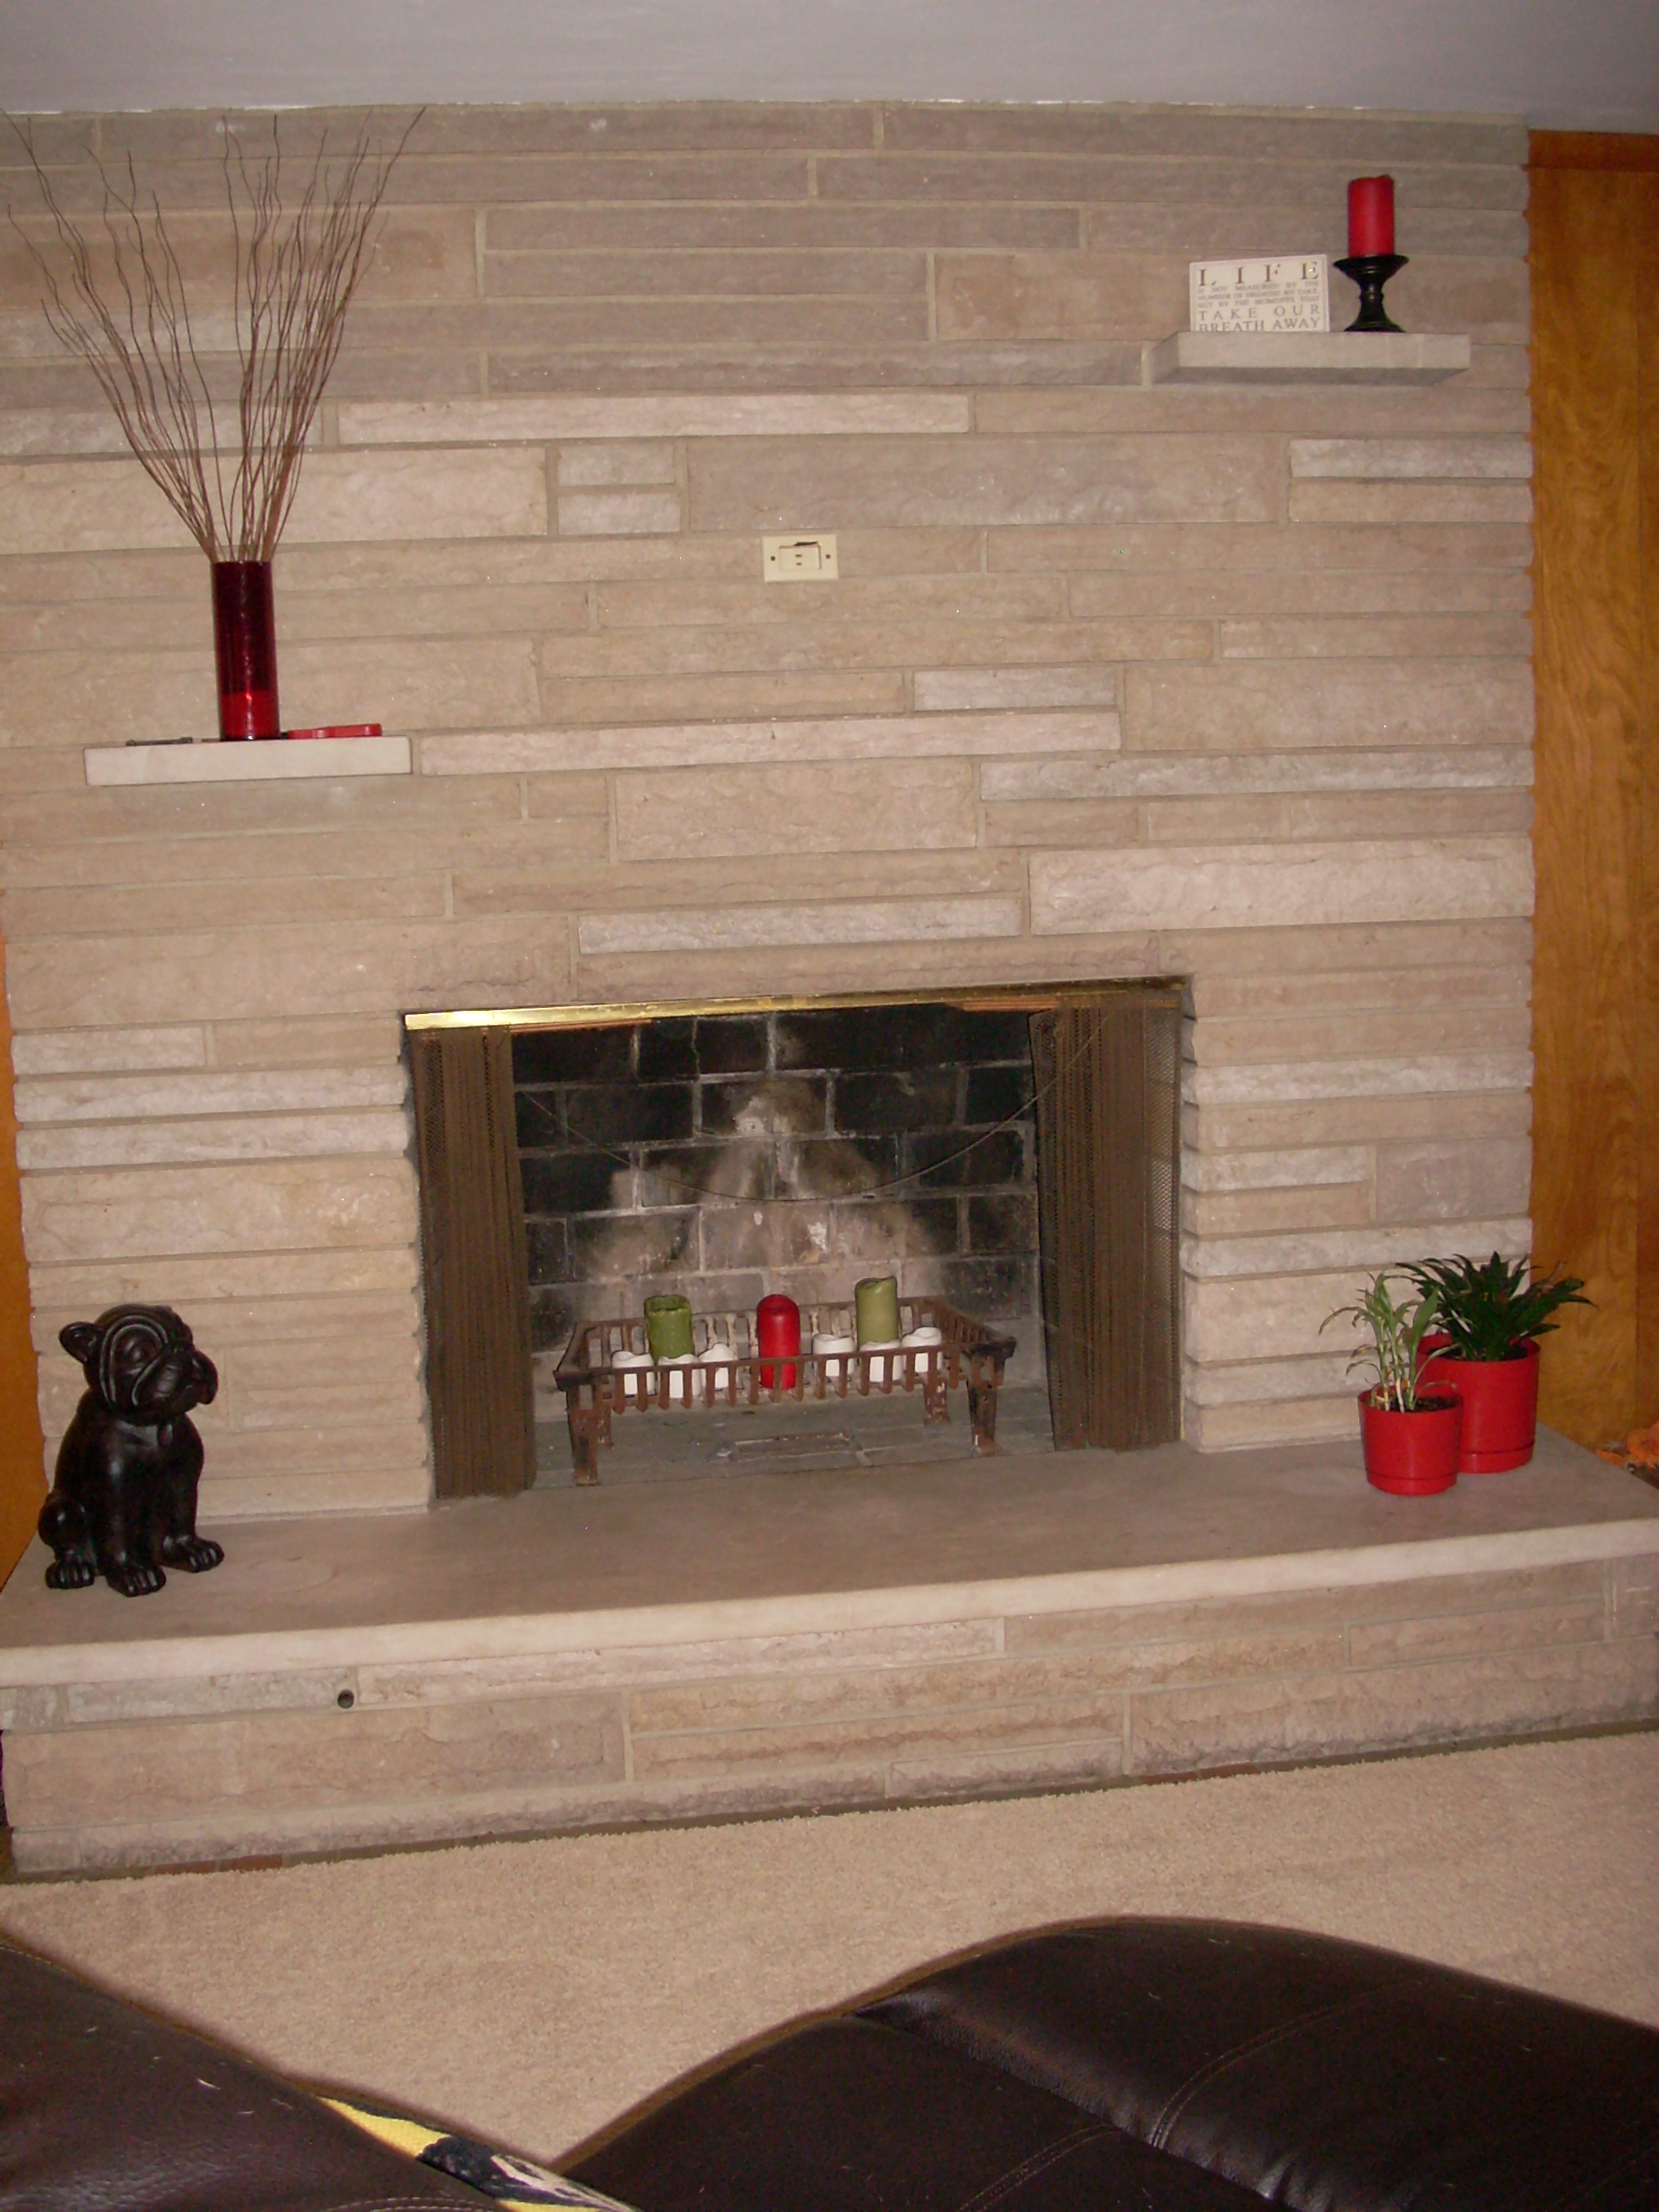 Decorating a fireplace - 180+ photos from readers' homes